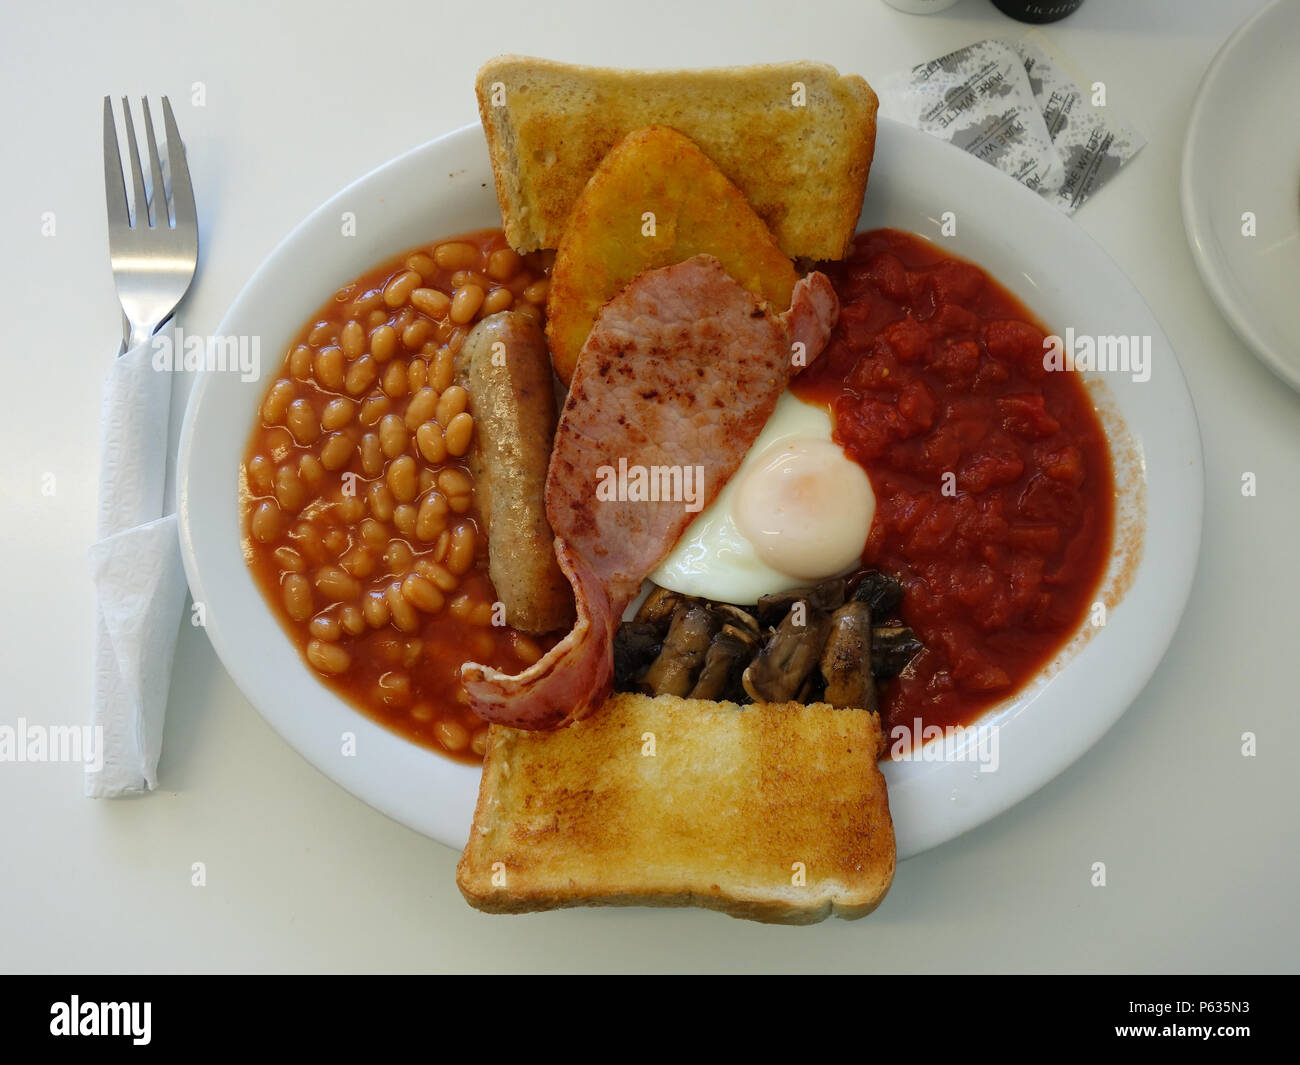 Full English all day Breakfast in a Sheffield cafe. Bacon, Egg, Tinned Tomatoes,Hash Browns, Beans, Sausage, Mushrooms with toast and of course a good Stock Photo